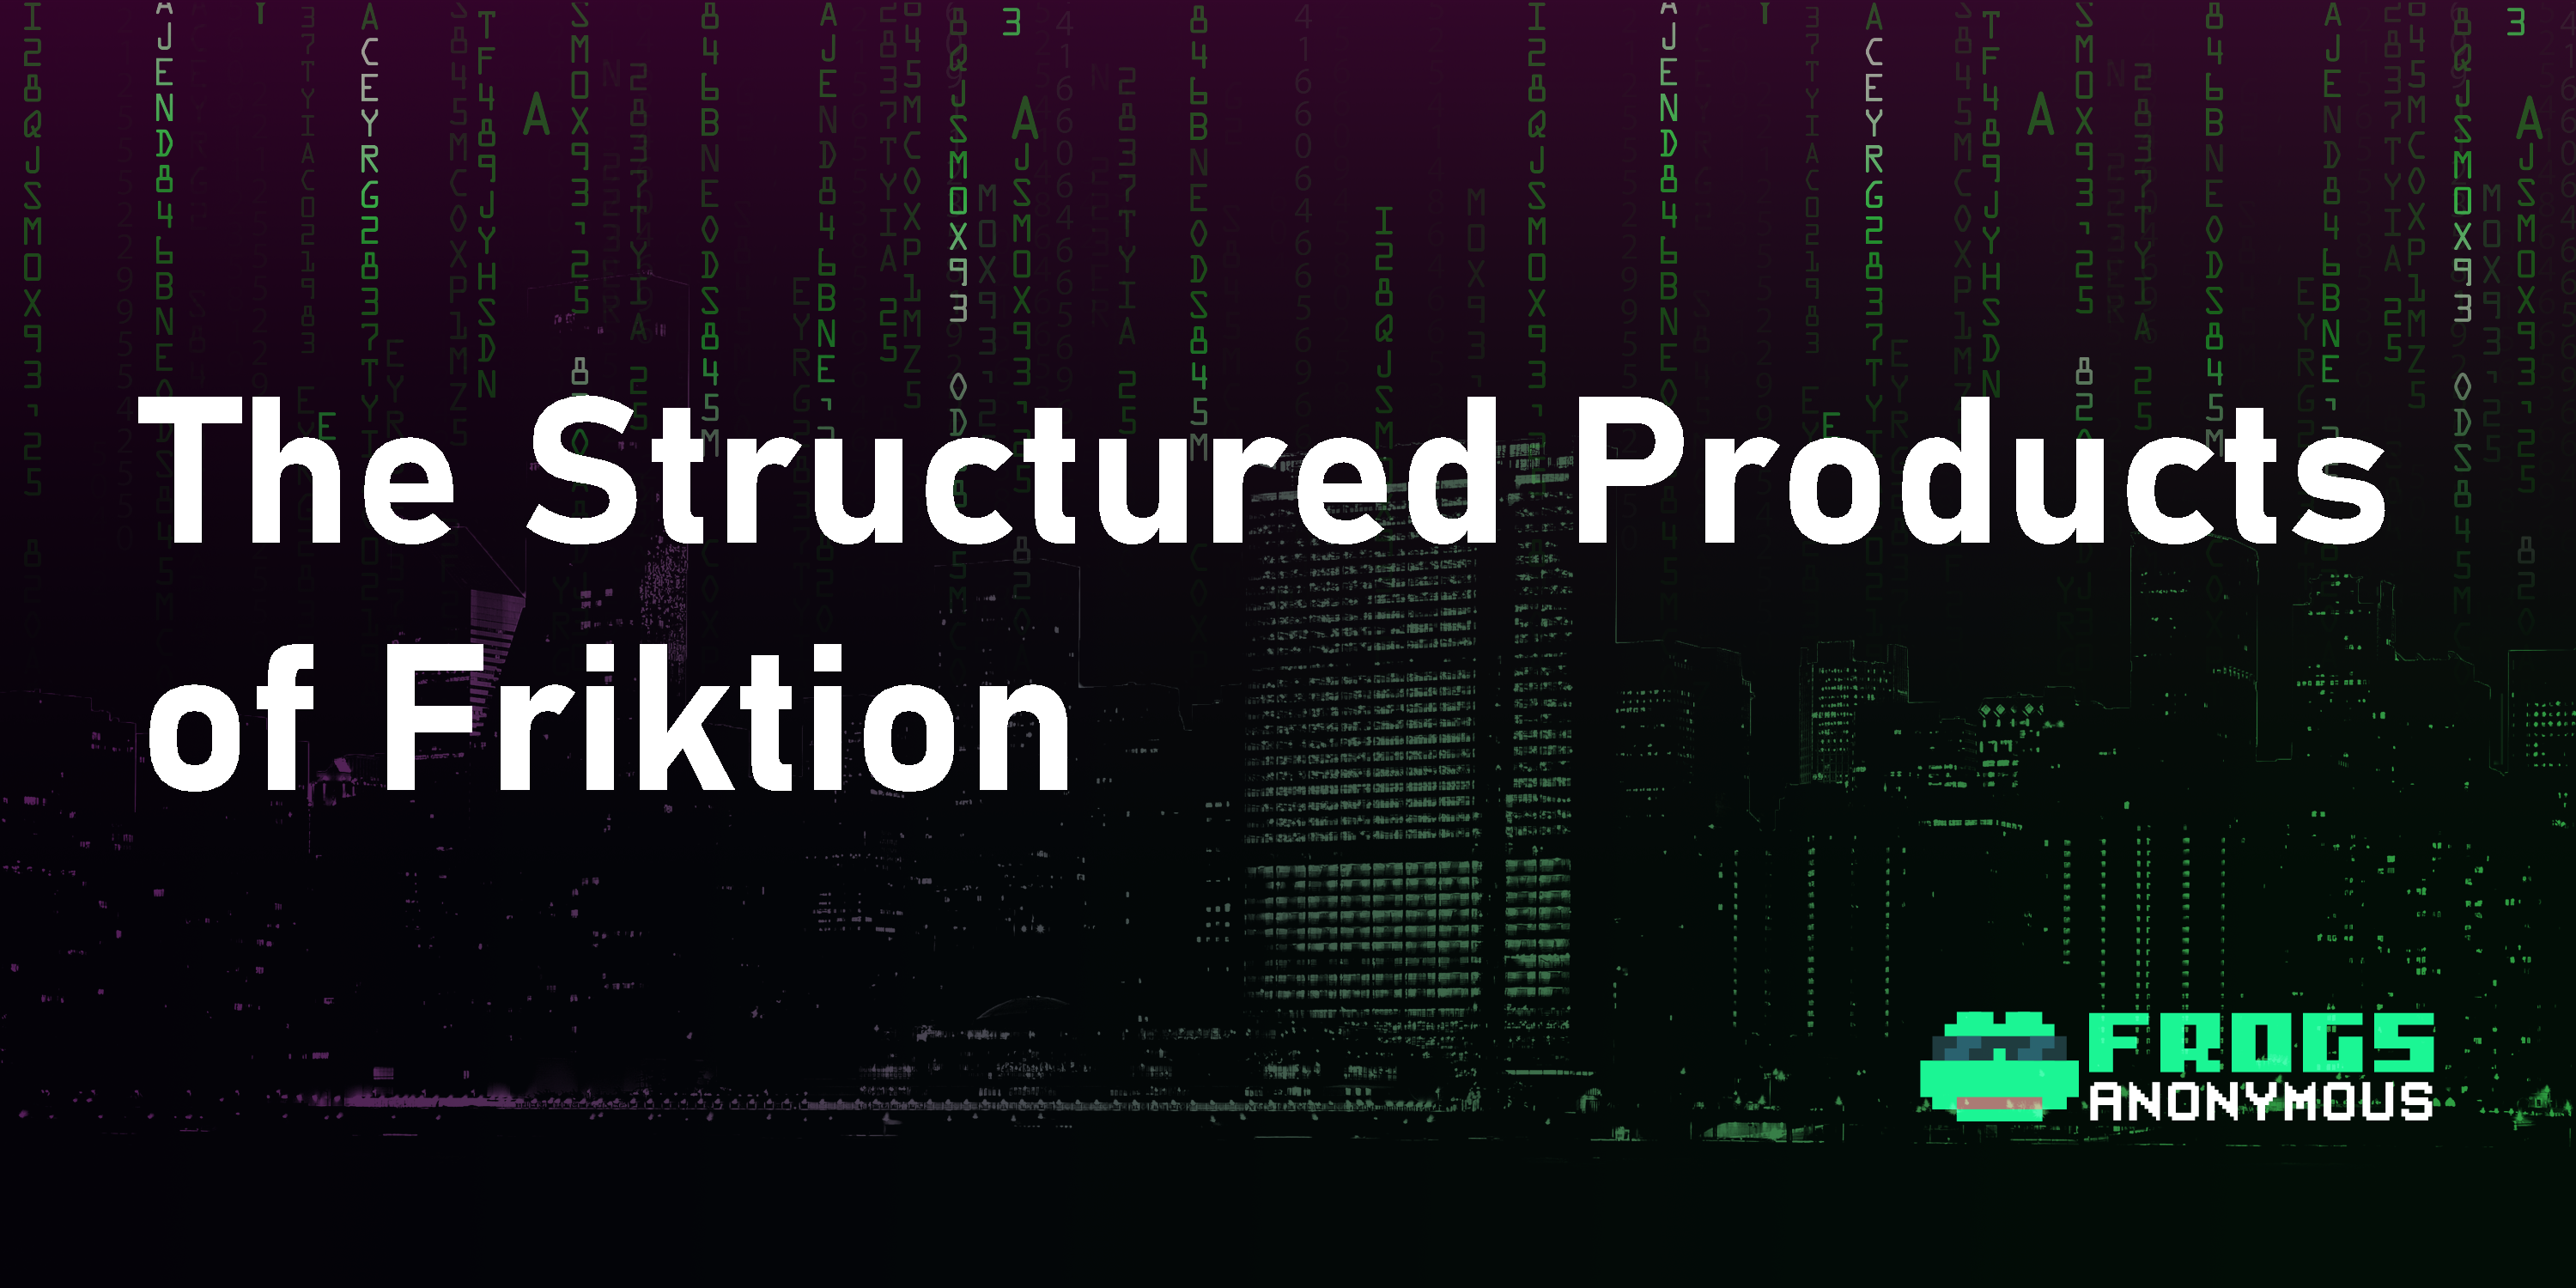 The Structured Products of Friktion